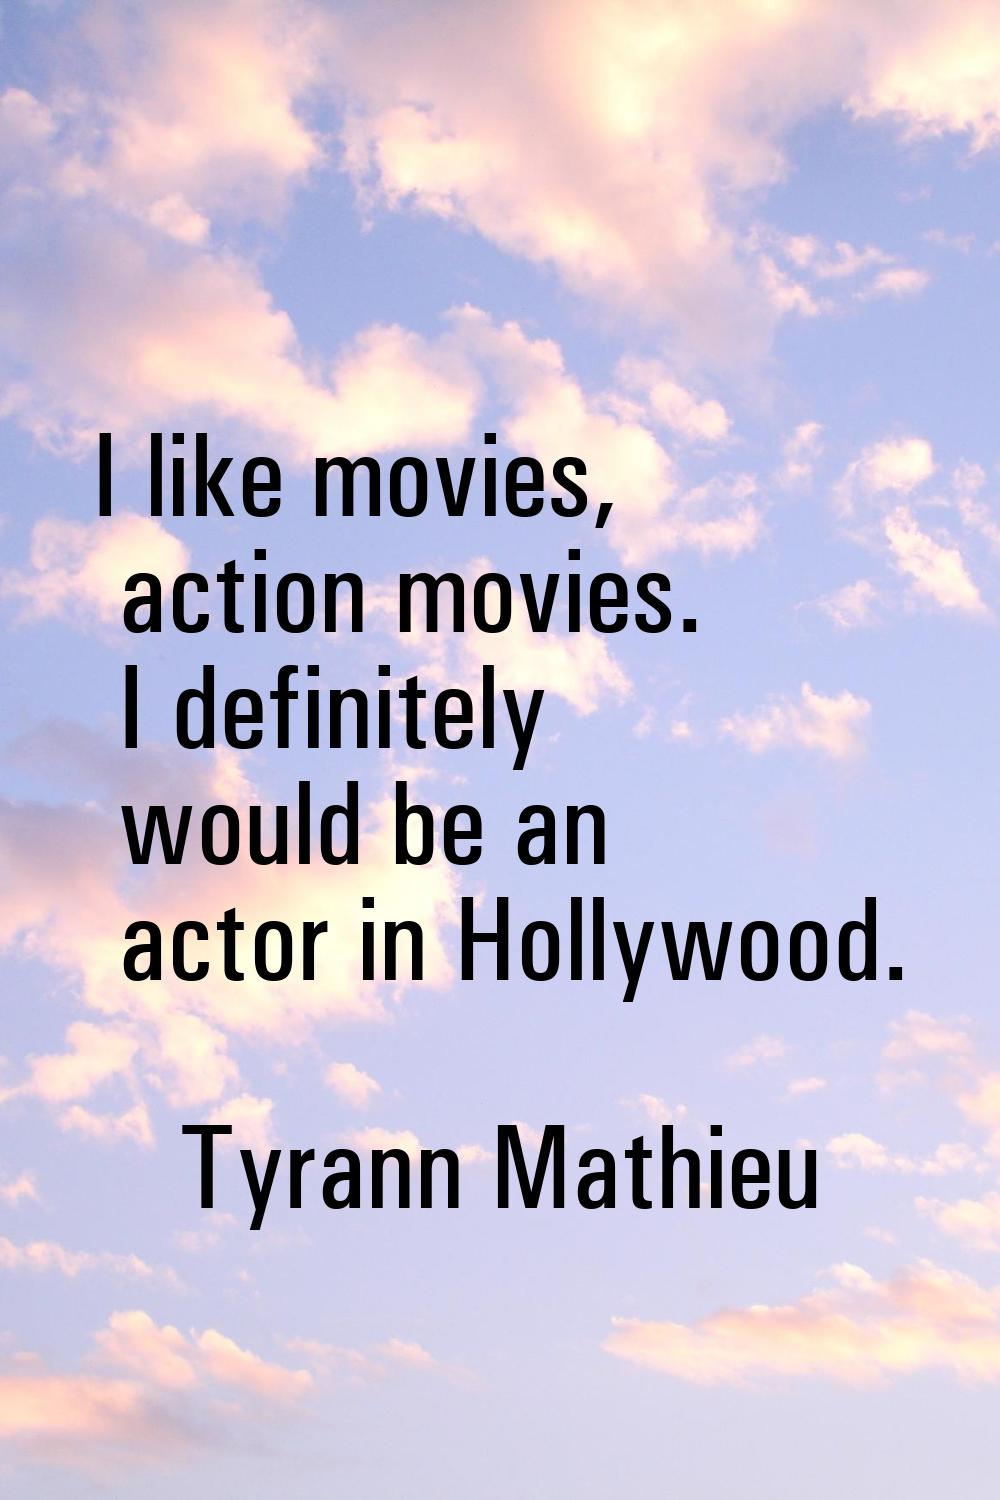 I like movies, action movies. I definitely would be an actor in Hollywood.